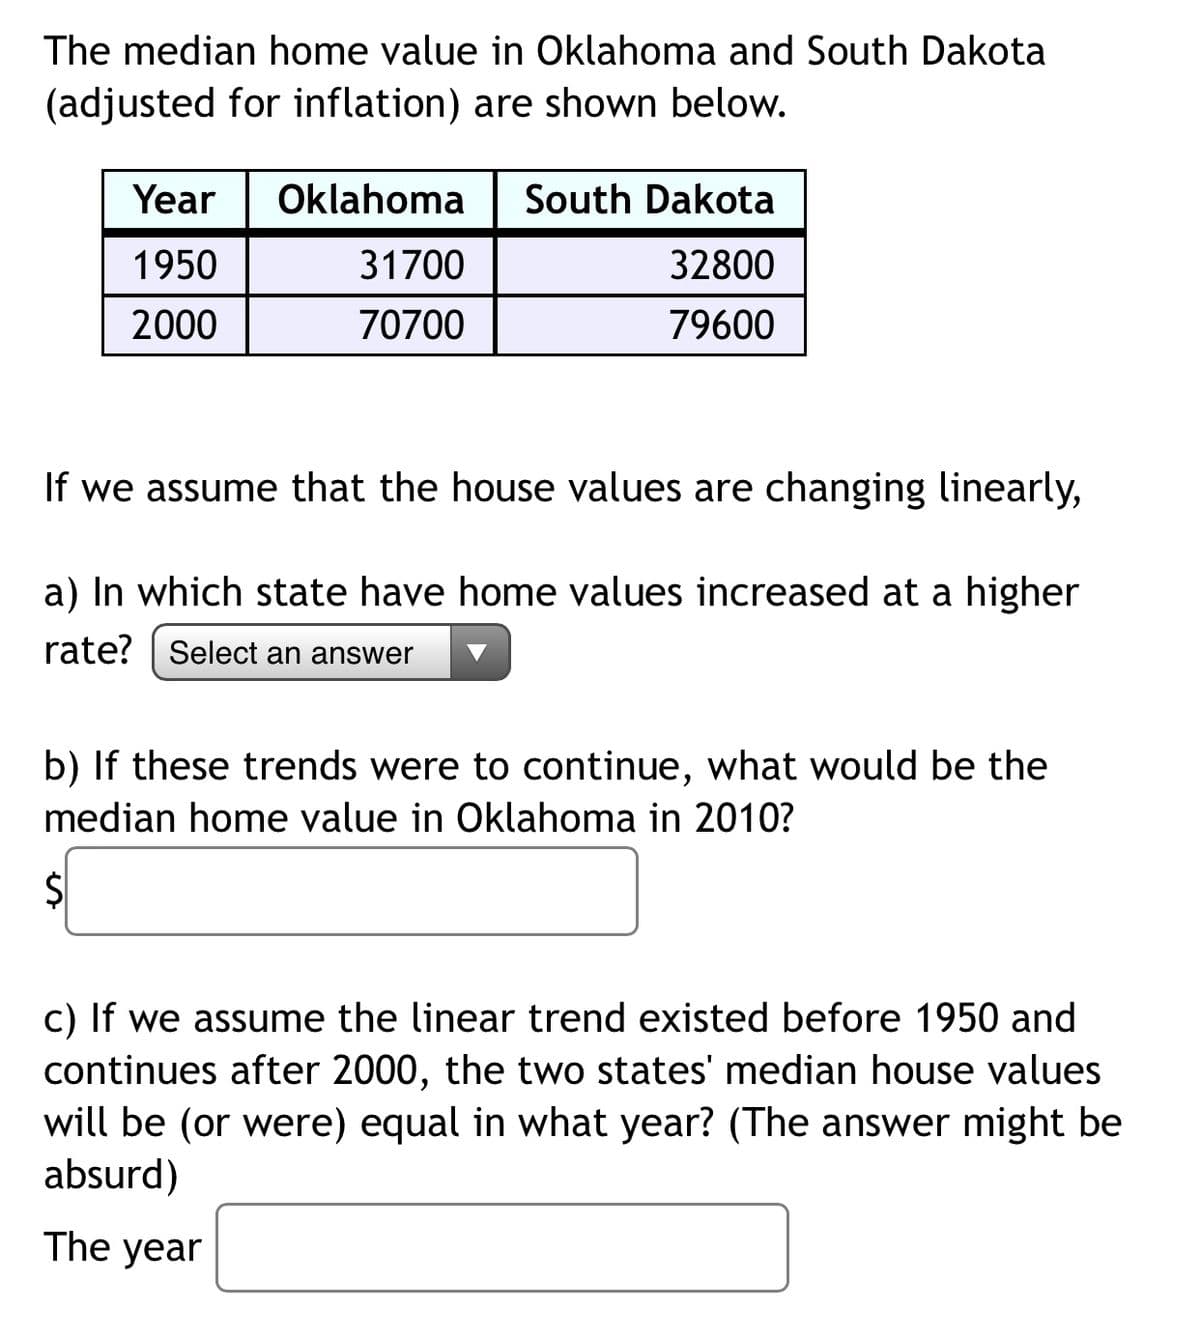 The median home value in Oklahoma and South Dakota
(adjusted for inflation) are shown below.
Year
Oklahoma | South Dakota
1950
31700
32800
2000
70700
79600
If we assume that the house values are changing linearly,
a) In which state have home values increased at a higher
rate?
Select an answer
b) If these trends were to continue, what would be the
median home value in Oklahoma in 2010?
c) If we assume the linear trend existed before 1950 and
continues after 2000, the two states' median house values
will be (or were) equal in what year? (The answer might be
absurd)
The year
